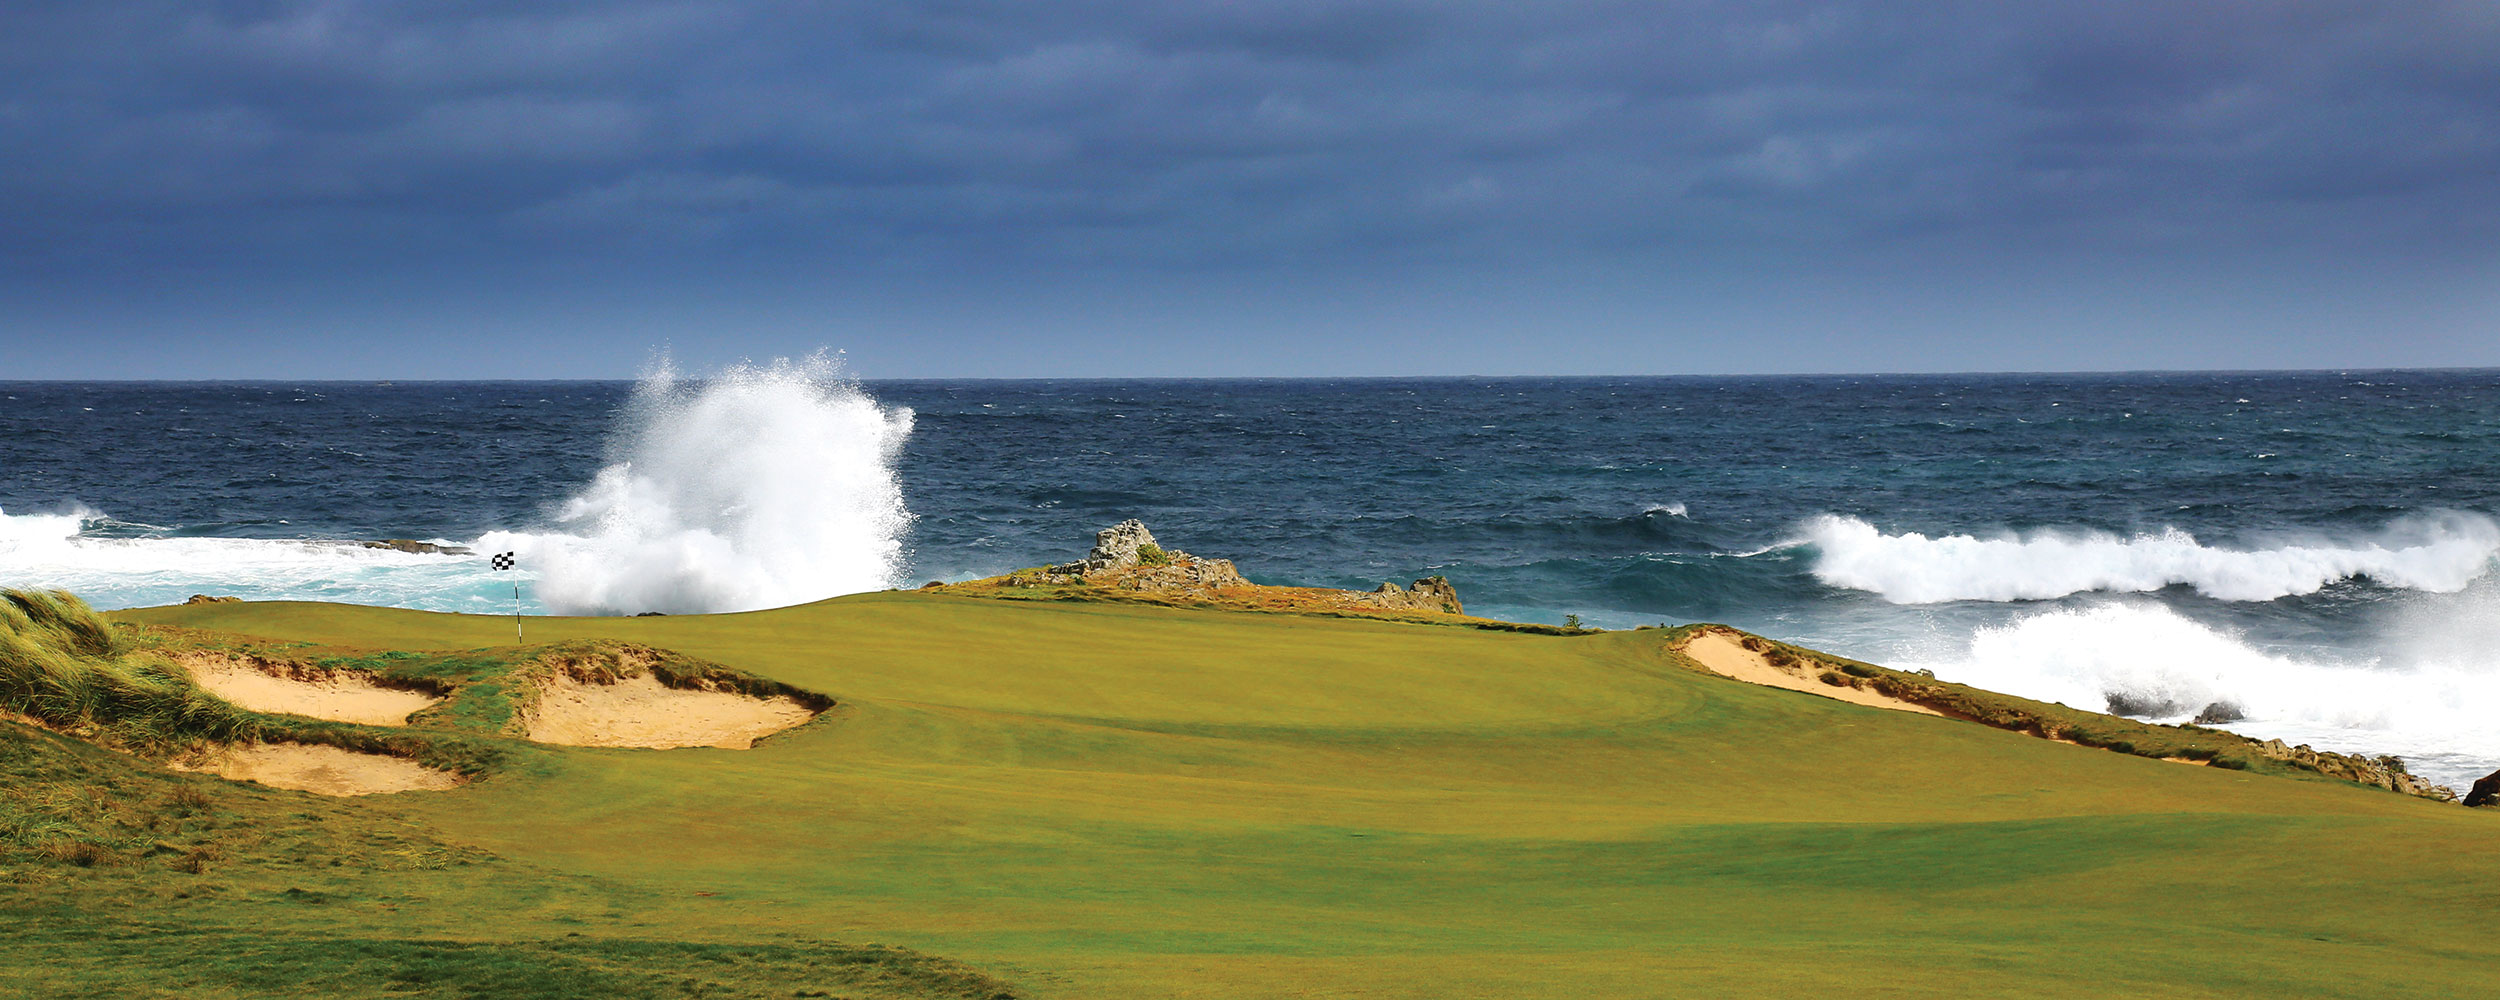 The wild seas off King Island are a constant companion during any round at Ocean Dunes.